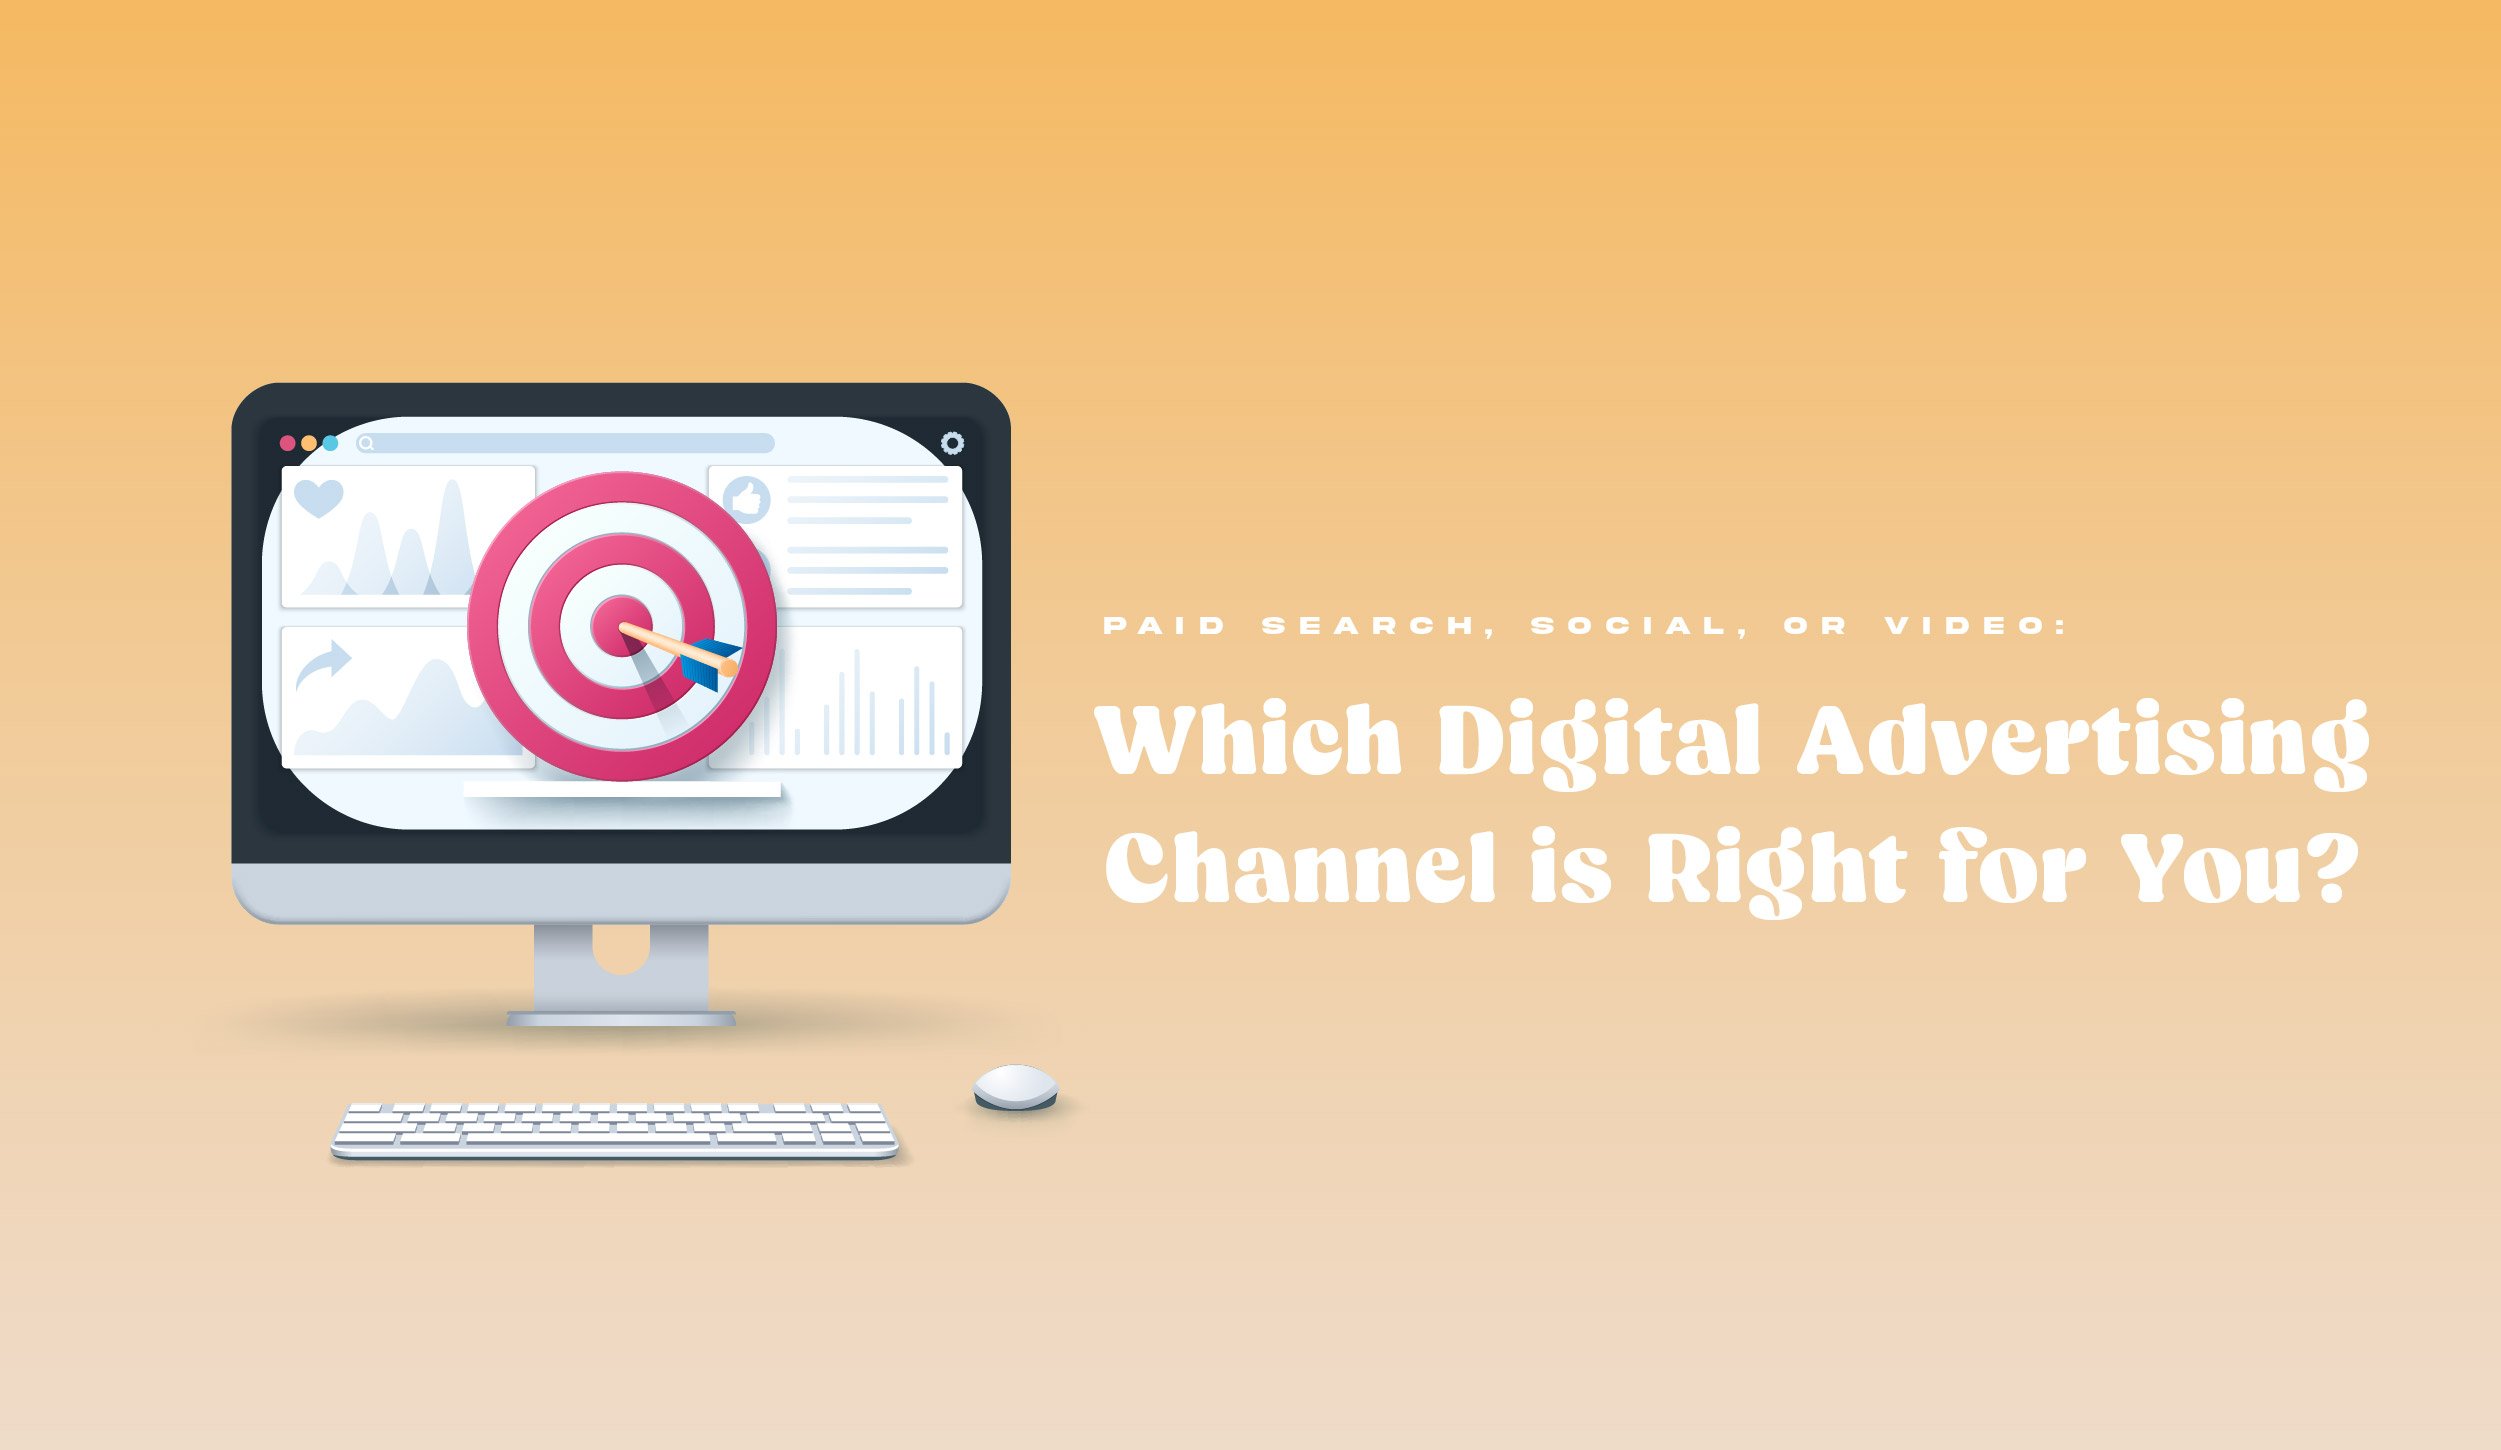 Paid Search, Social, or Video: Which Digital Advertising Channel is Right for You?